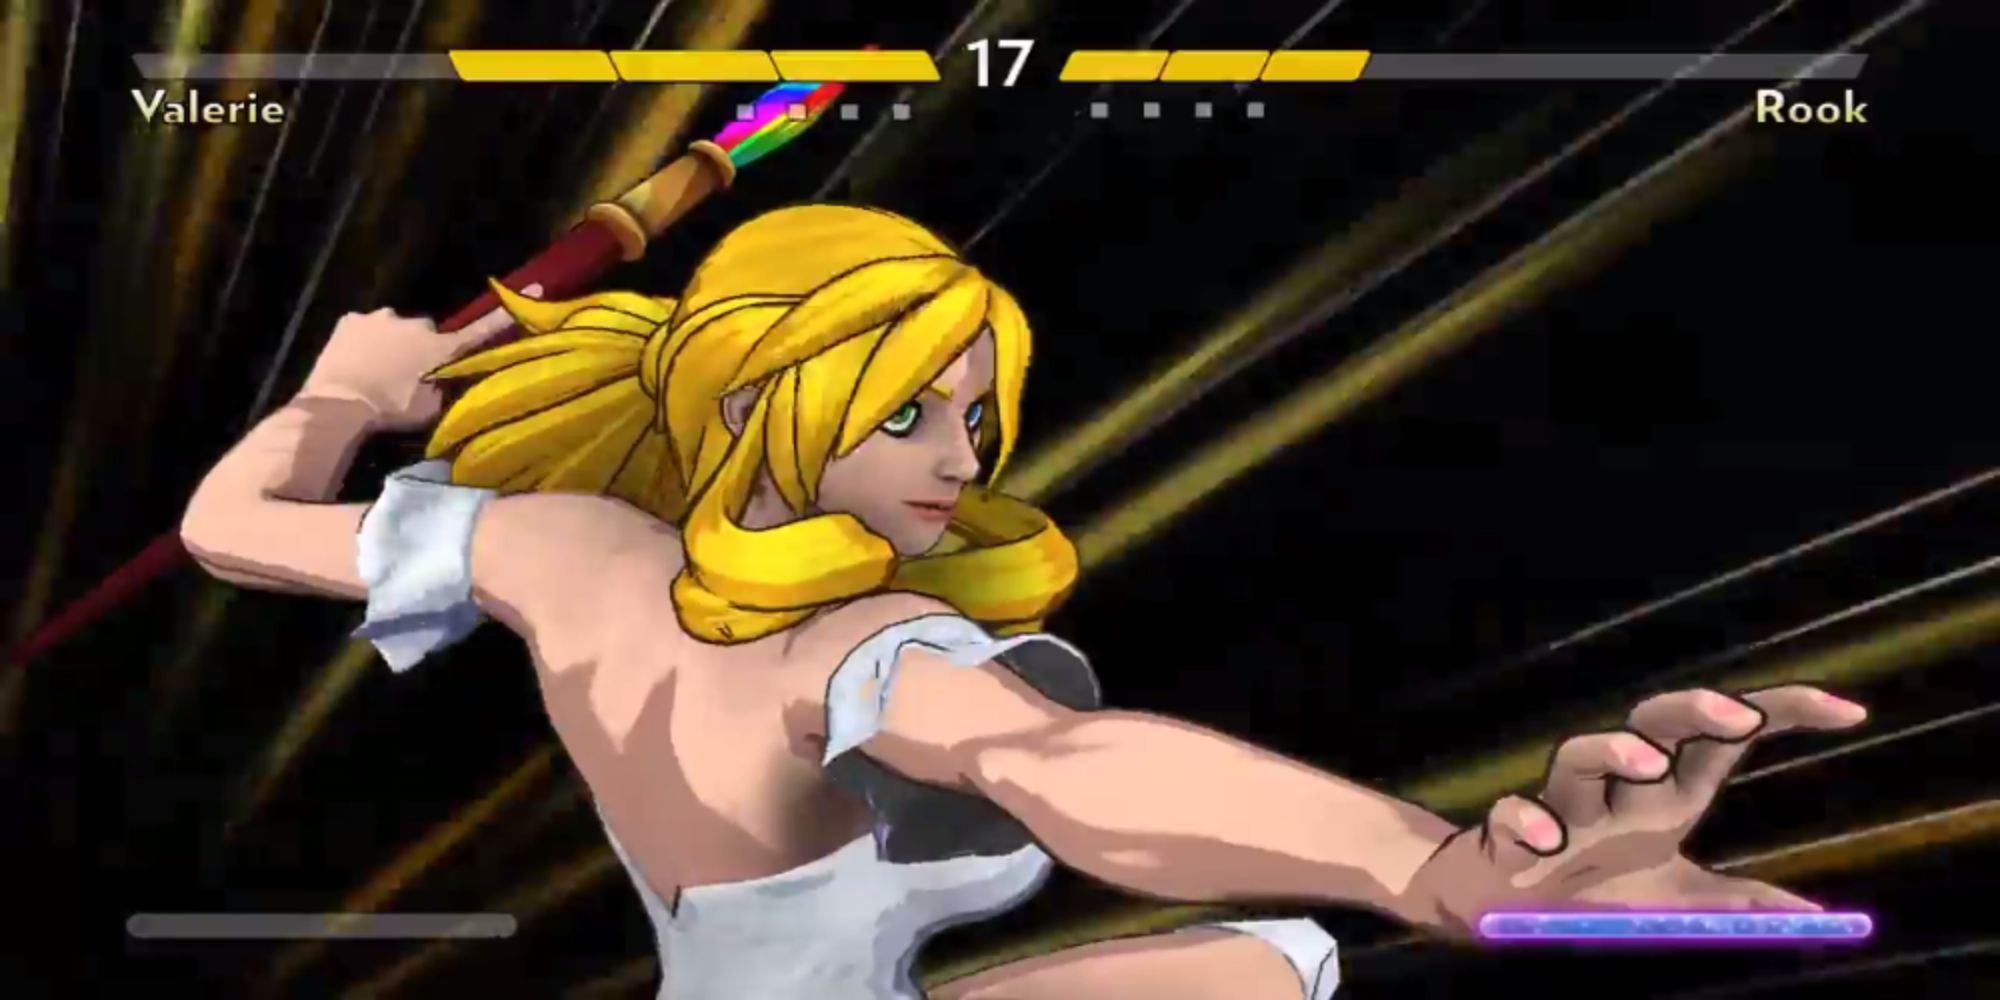 Fantasy Strike Valerie in the middle of a special fighting animation